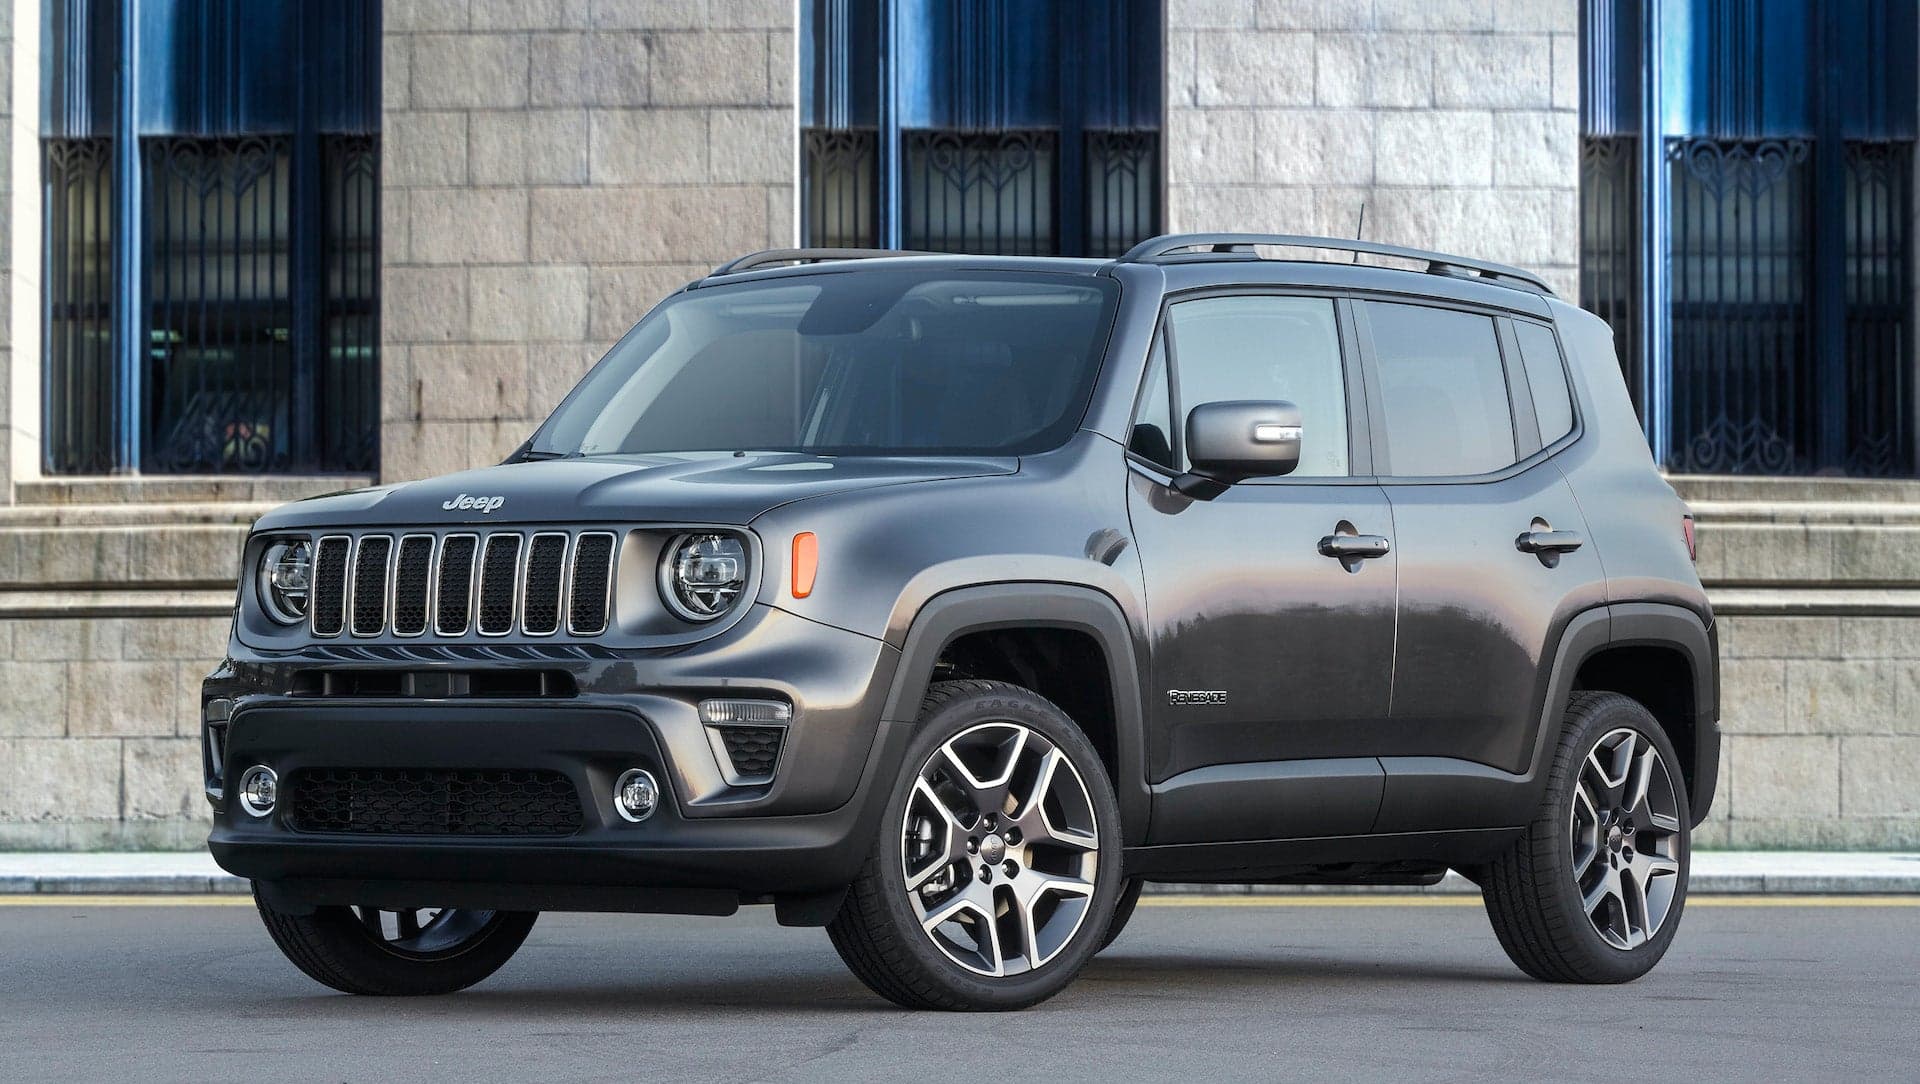 Jeep’s First EV Will Be Smaller Than the Renegade and Built in Italy: Report